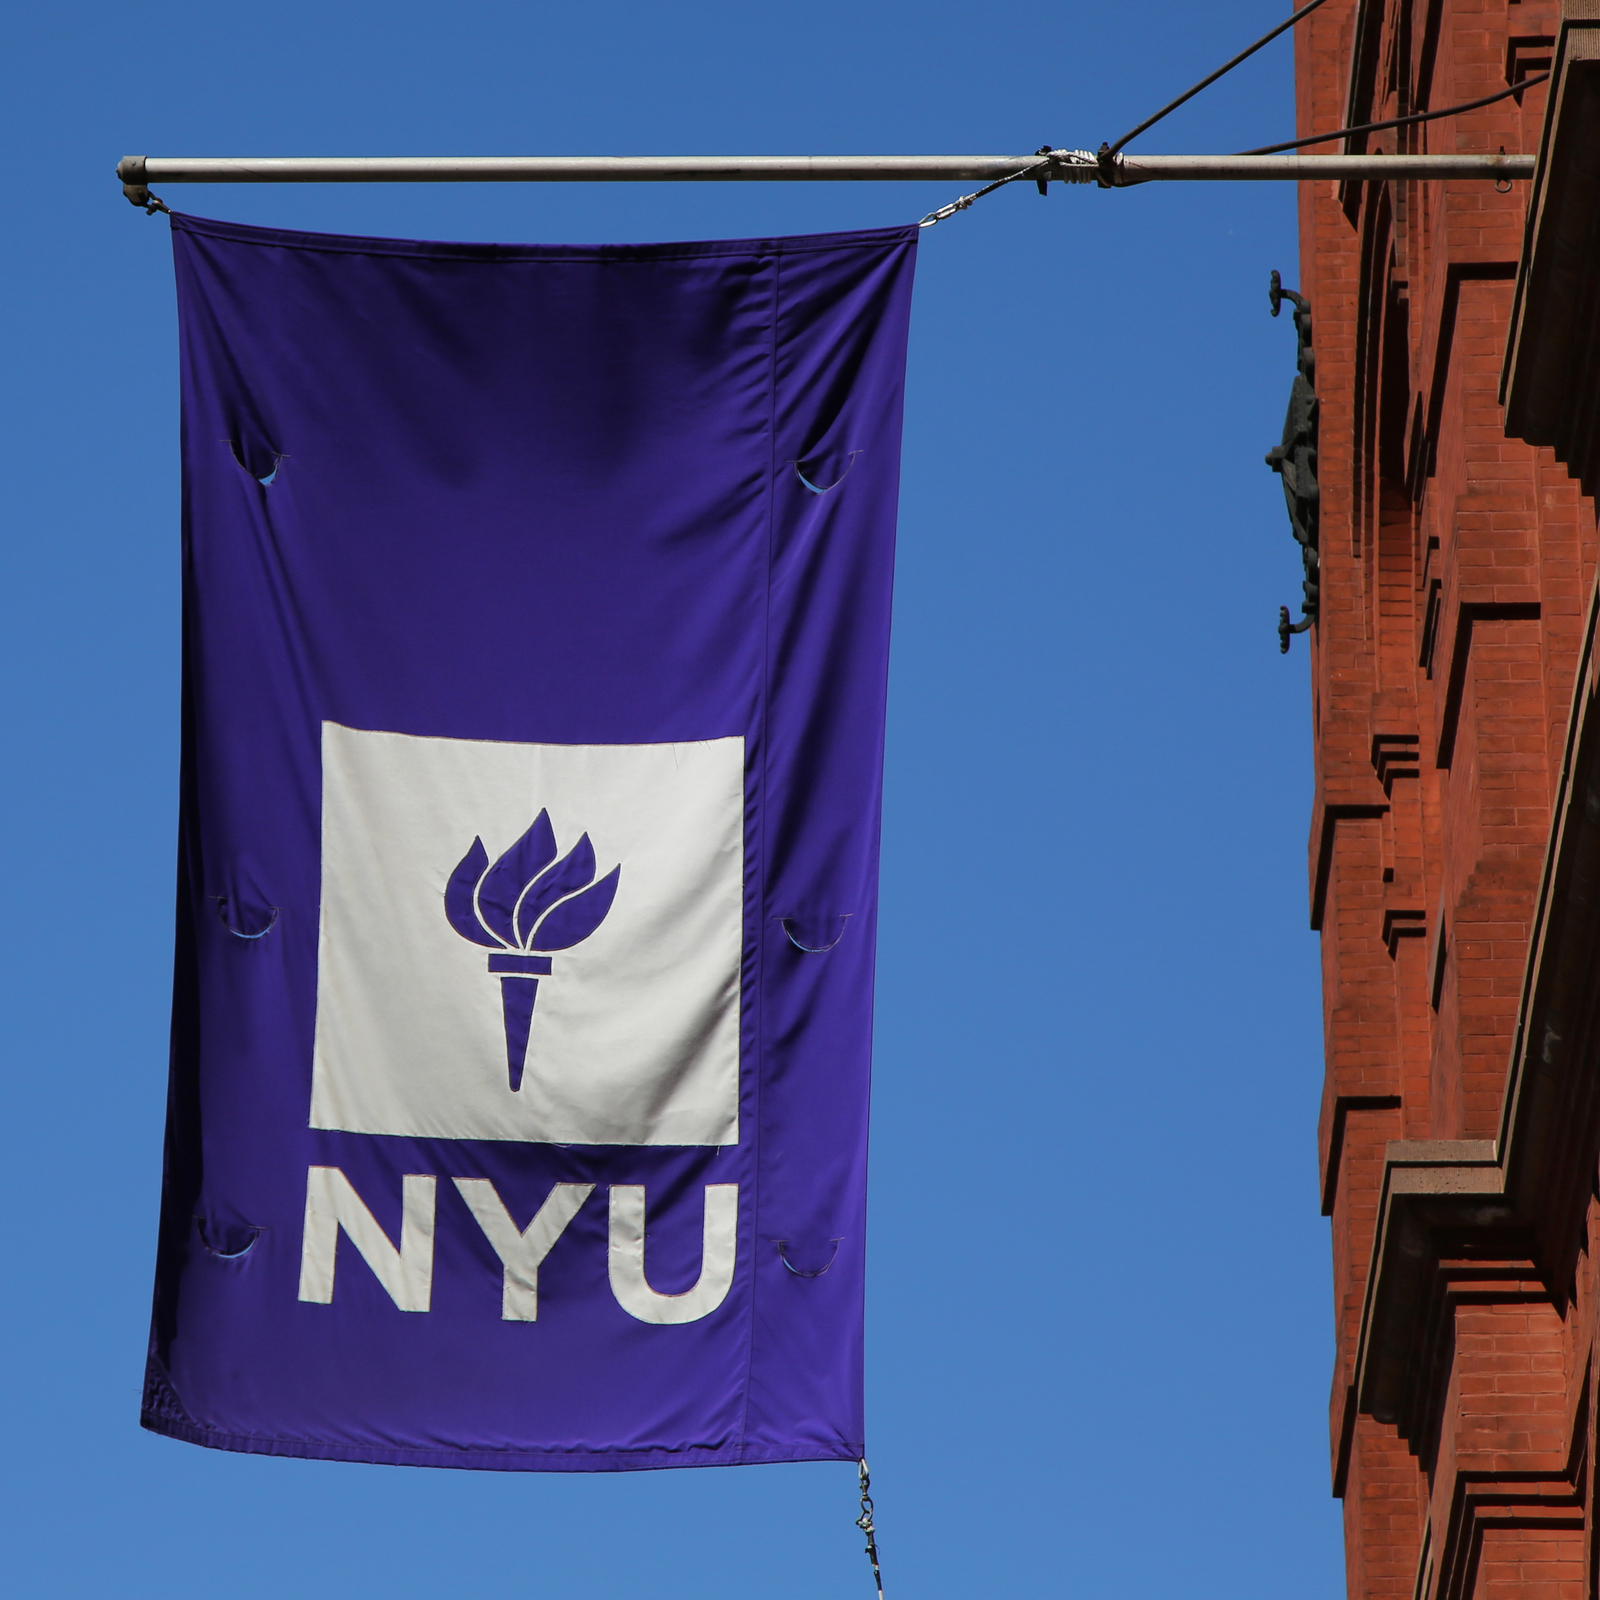 NYU Plans to Launch an Undergraduate Course in Cryptocurrencies